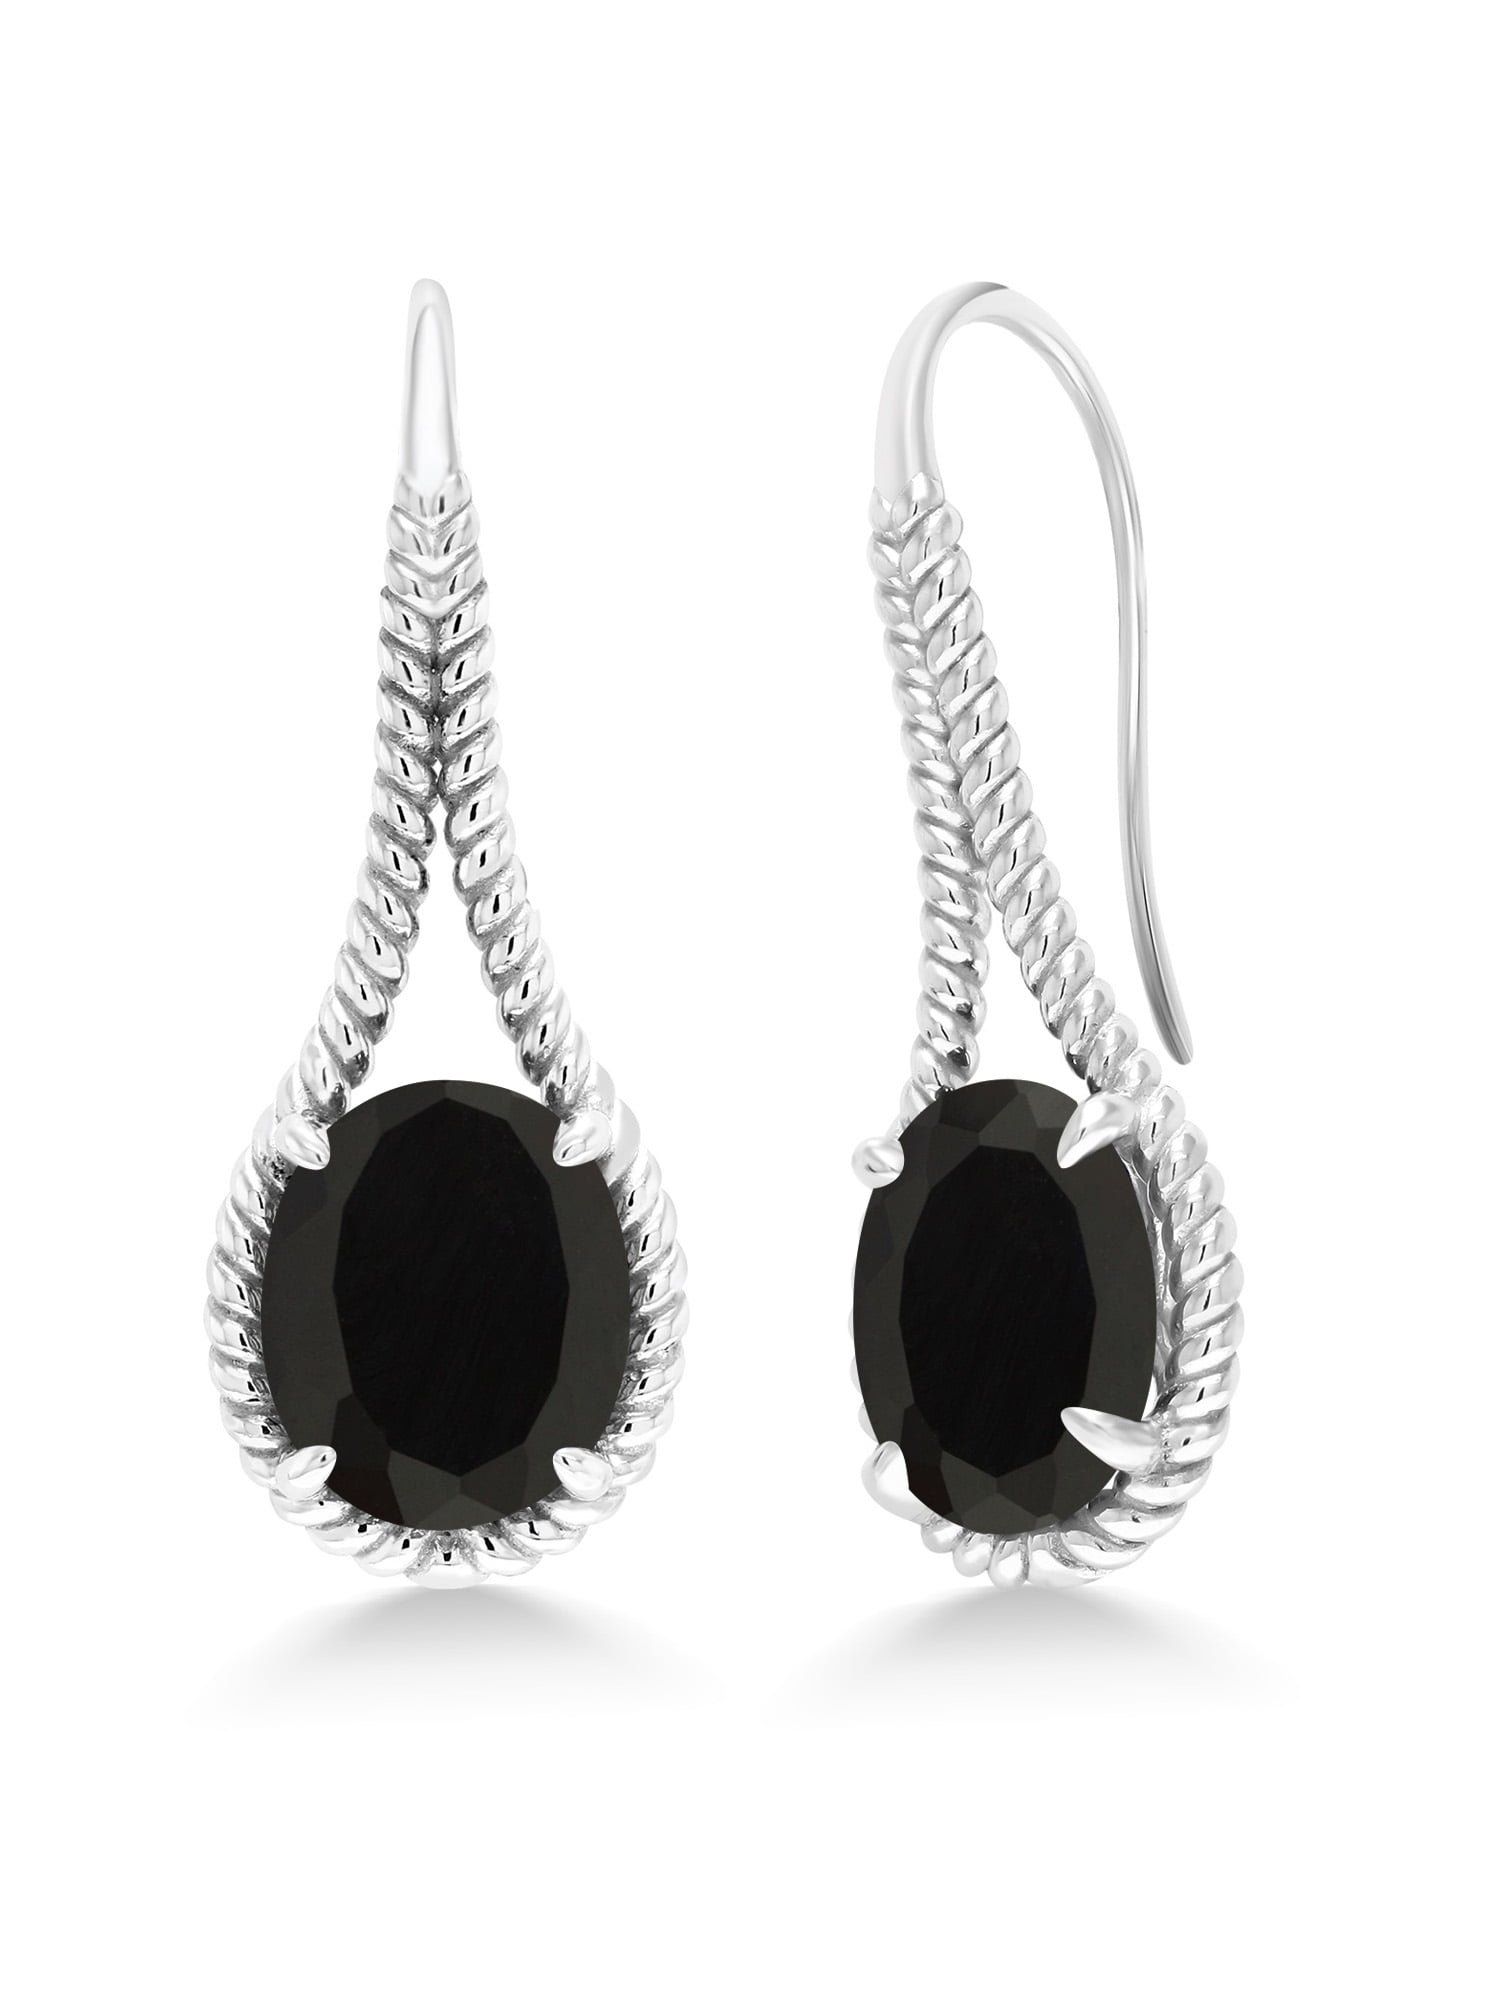 Details about   Sterling Silver Natural BLACK ONYX Gemstone Tube Earrings #2299...Handmade USA 